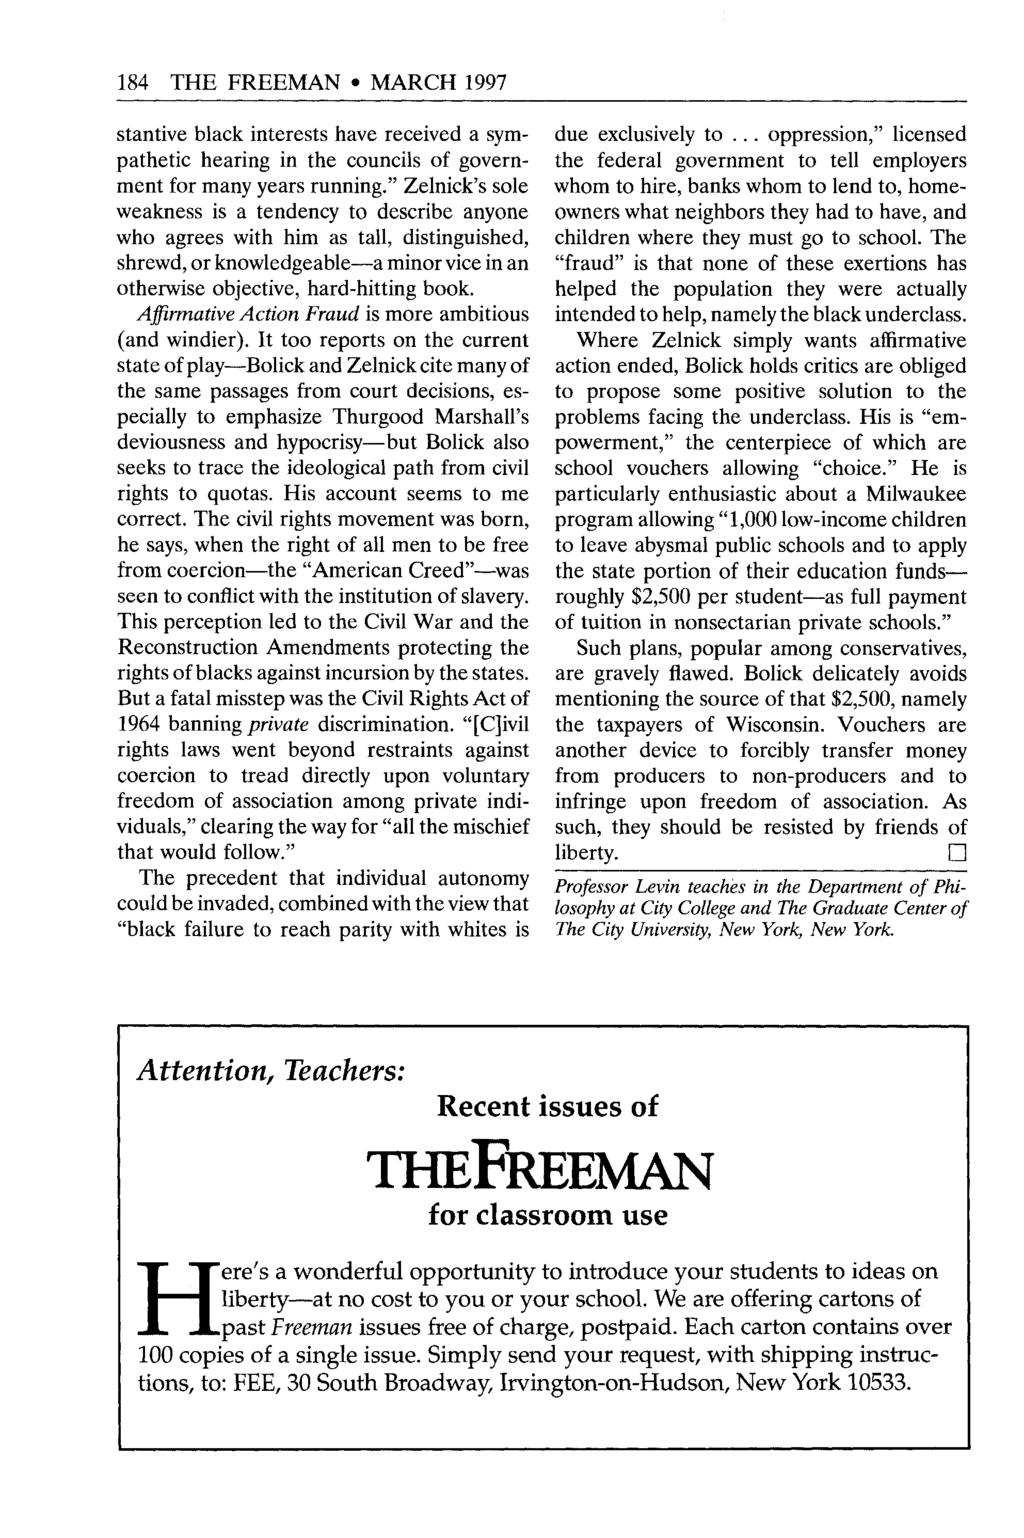 184 THE FREEMAN MARCH 1997 stantive black interests have received a sympathetic hearing in the councils of government for many years running.